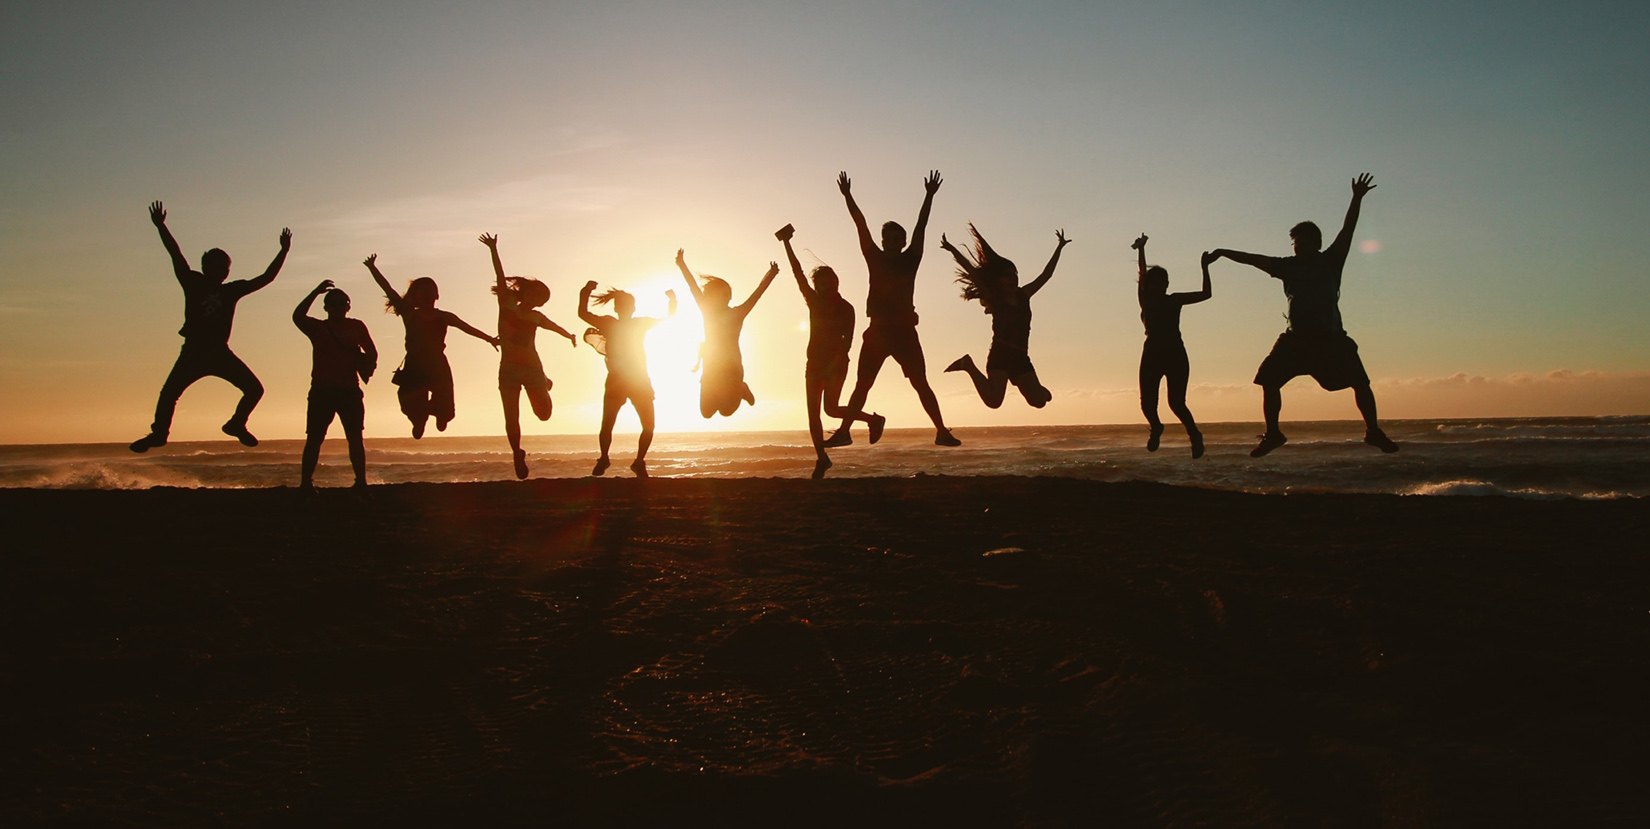 People jumping for joy - Things feel a bit rough at the moment. How can you choose to see the bright side? How can you be so positive when the world feels so negative?